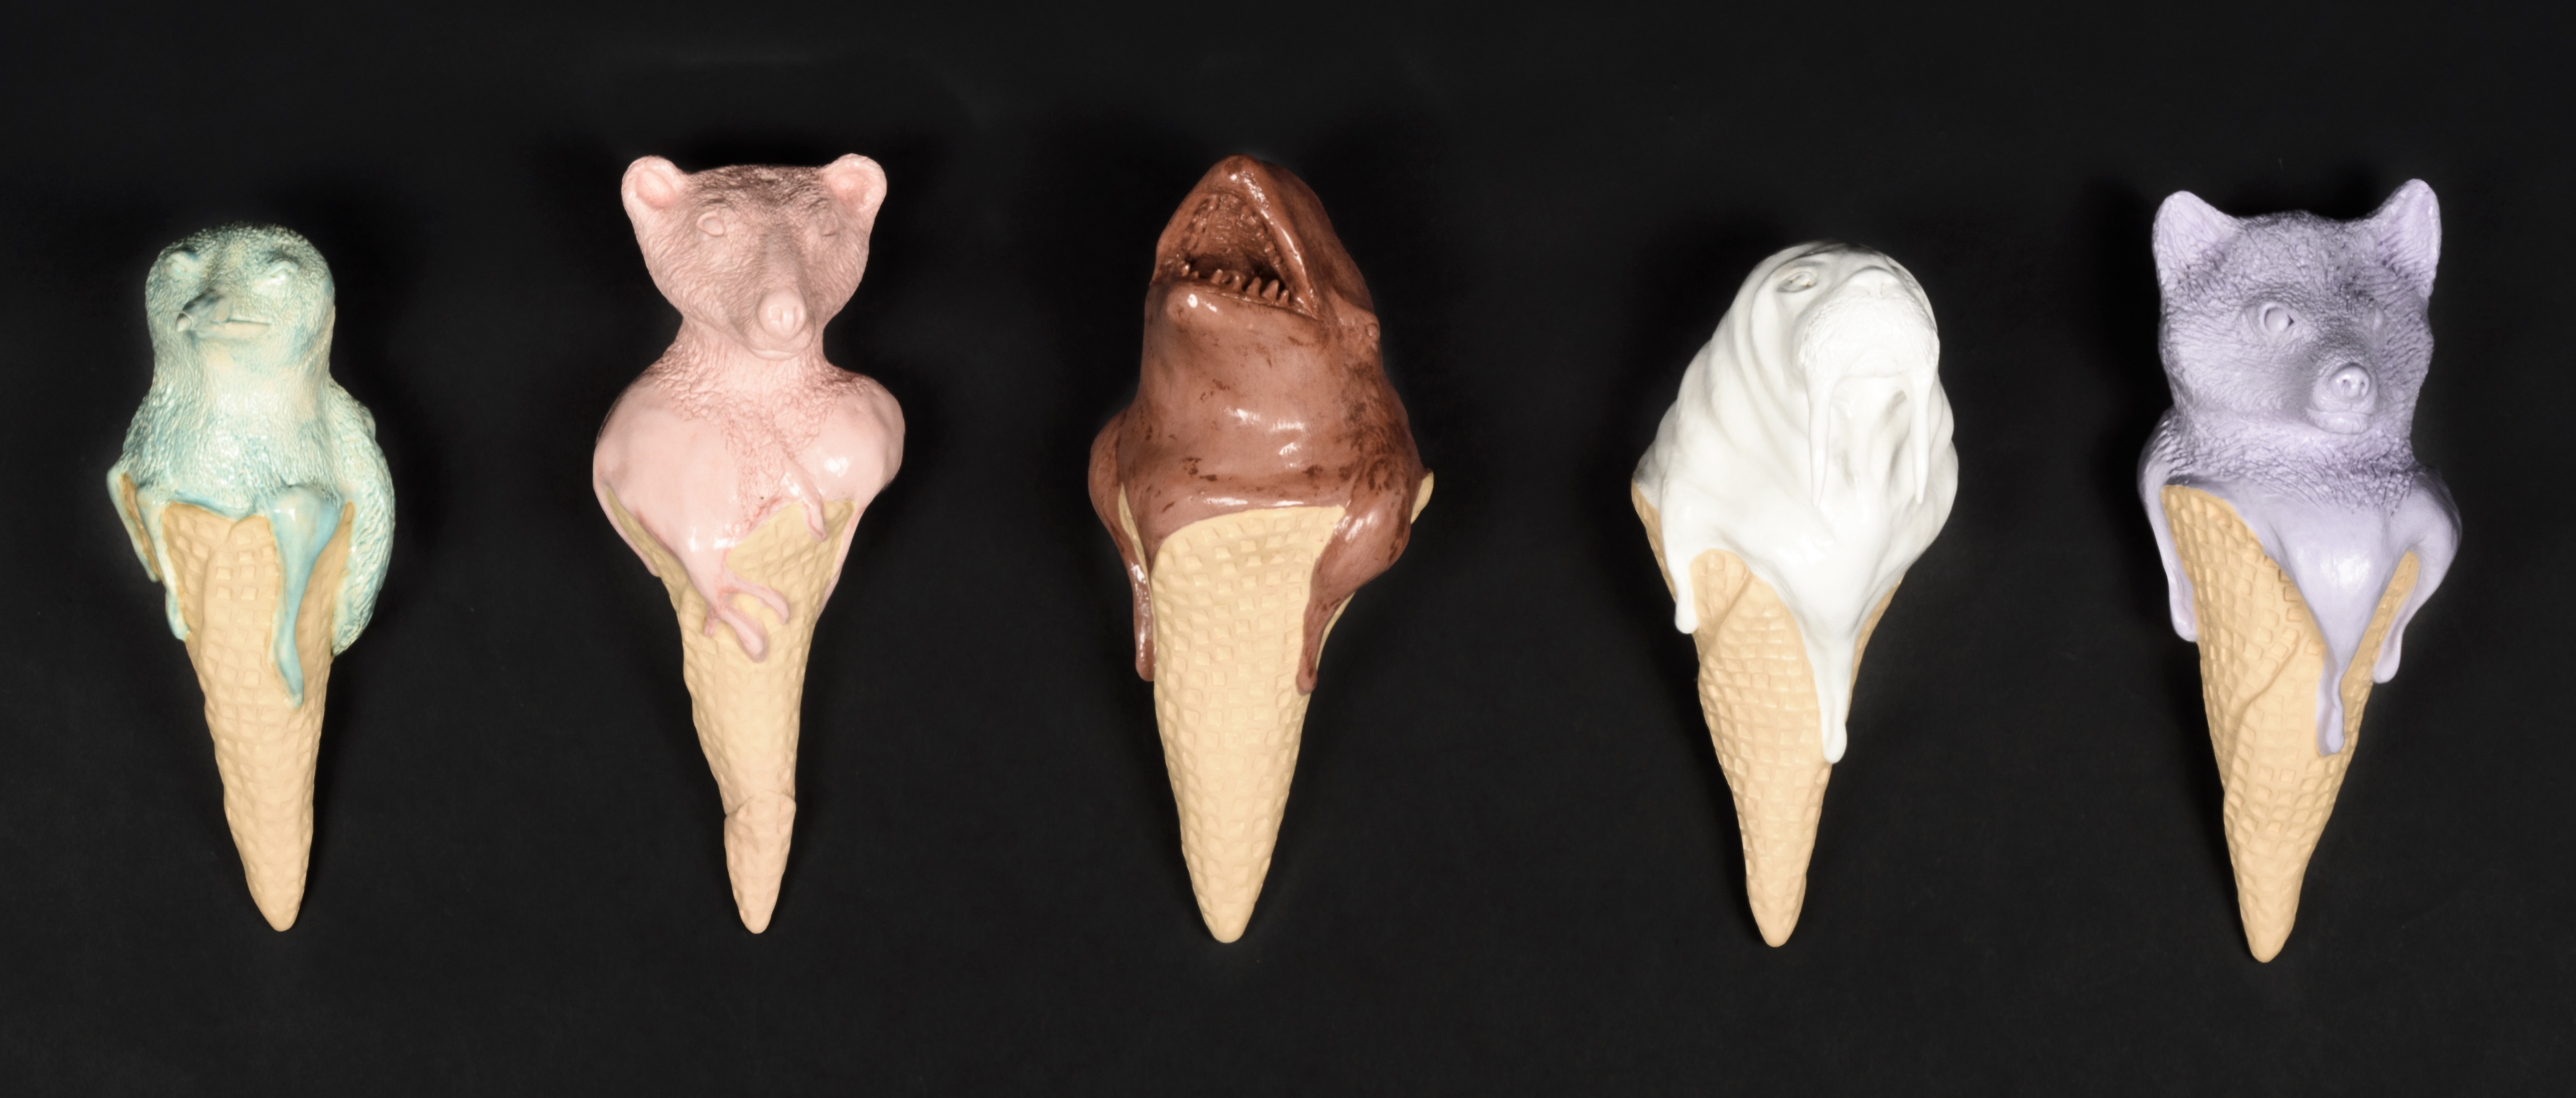 Five ceramic sculptures that look like melting icecream cones but each scoop of icecream is a bust of a different animal.